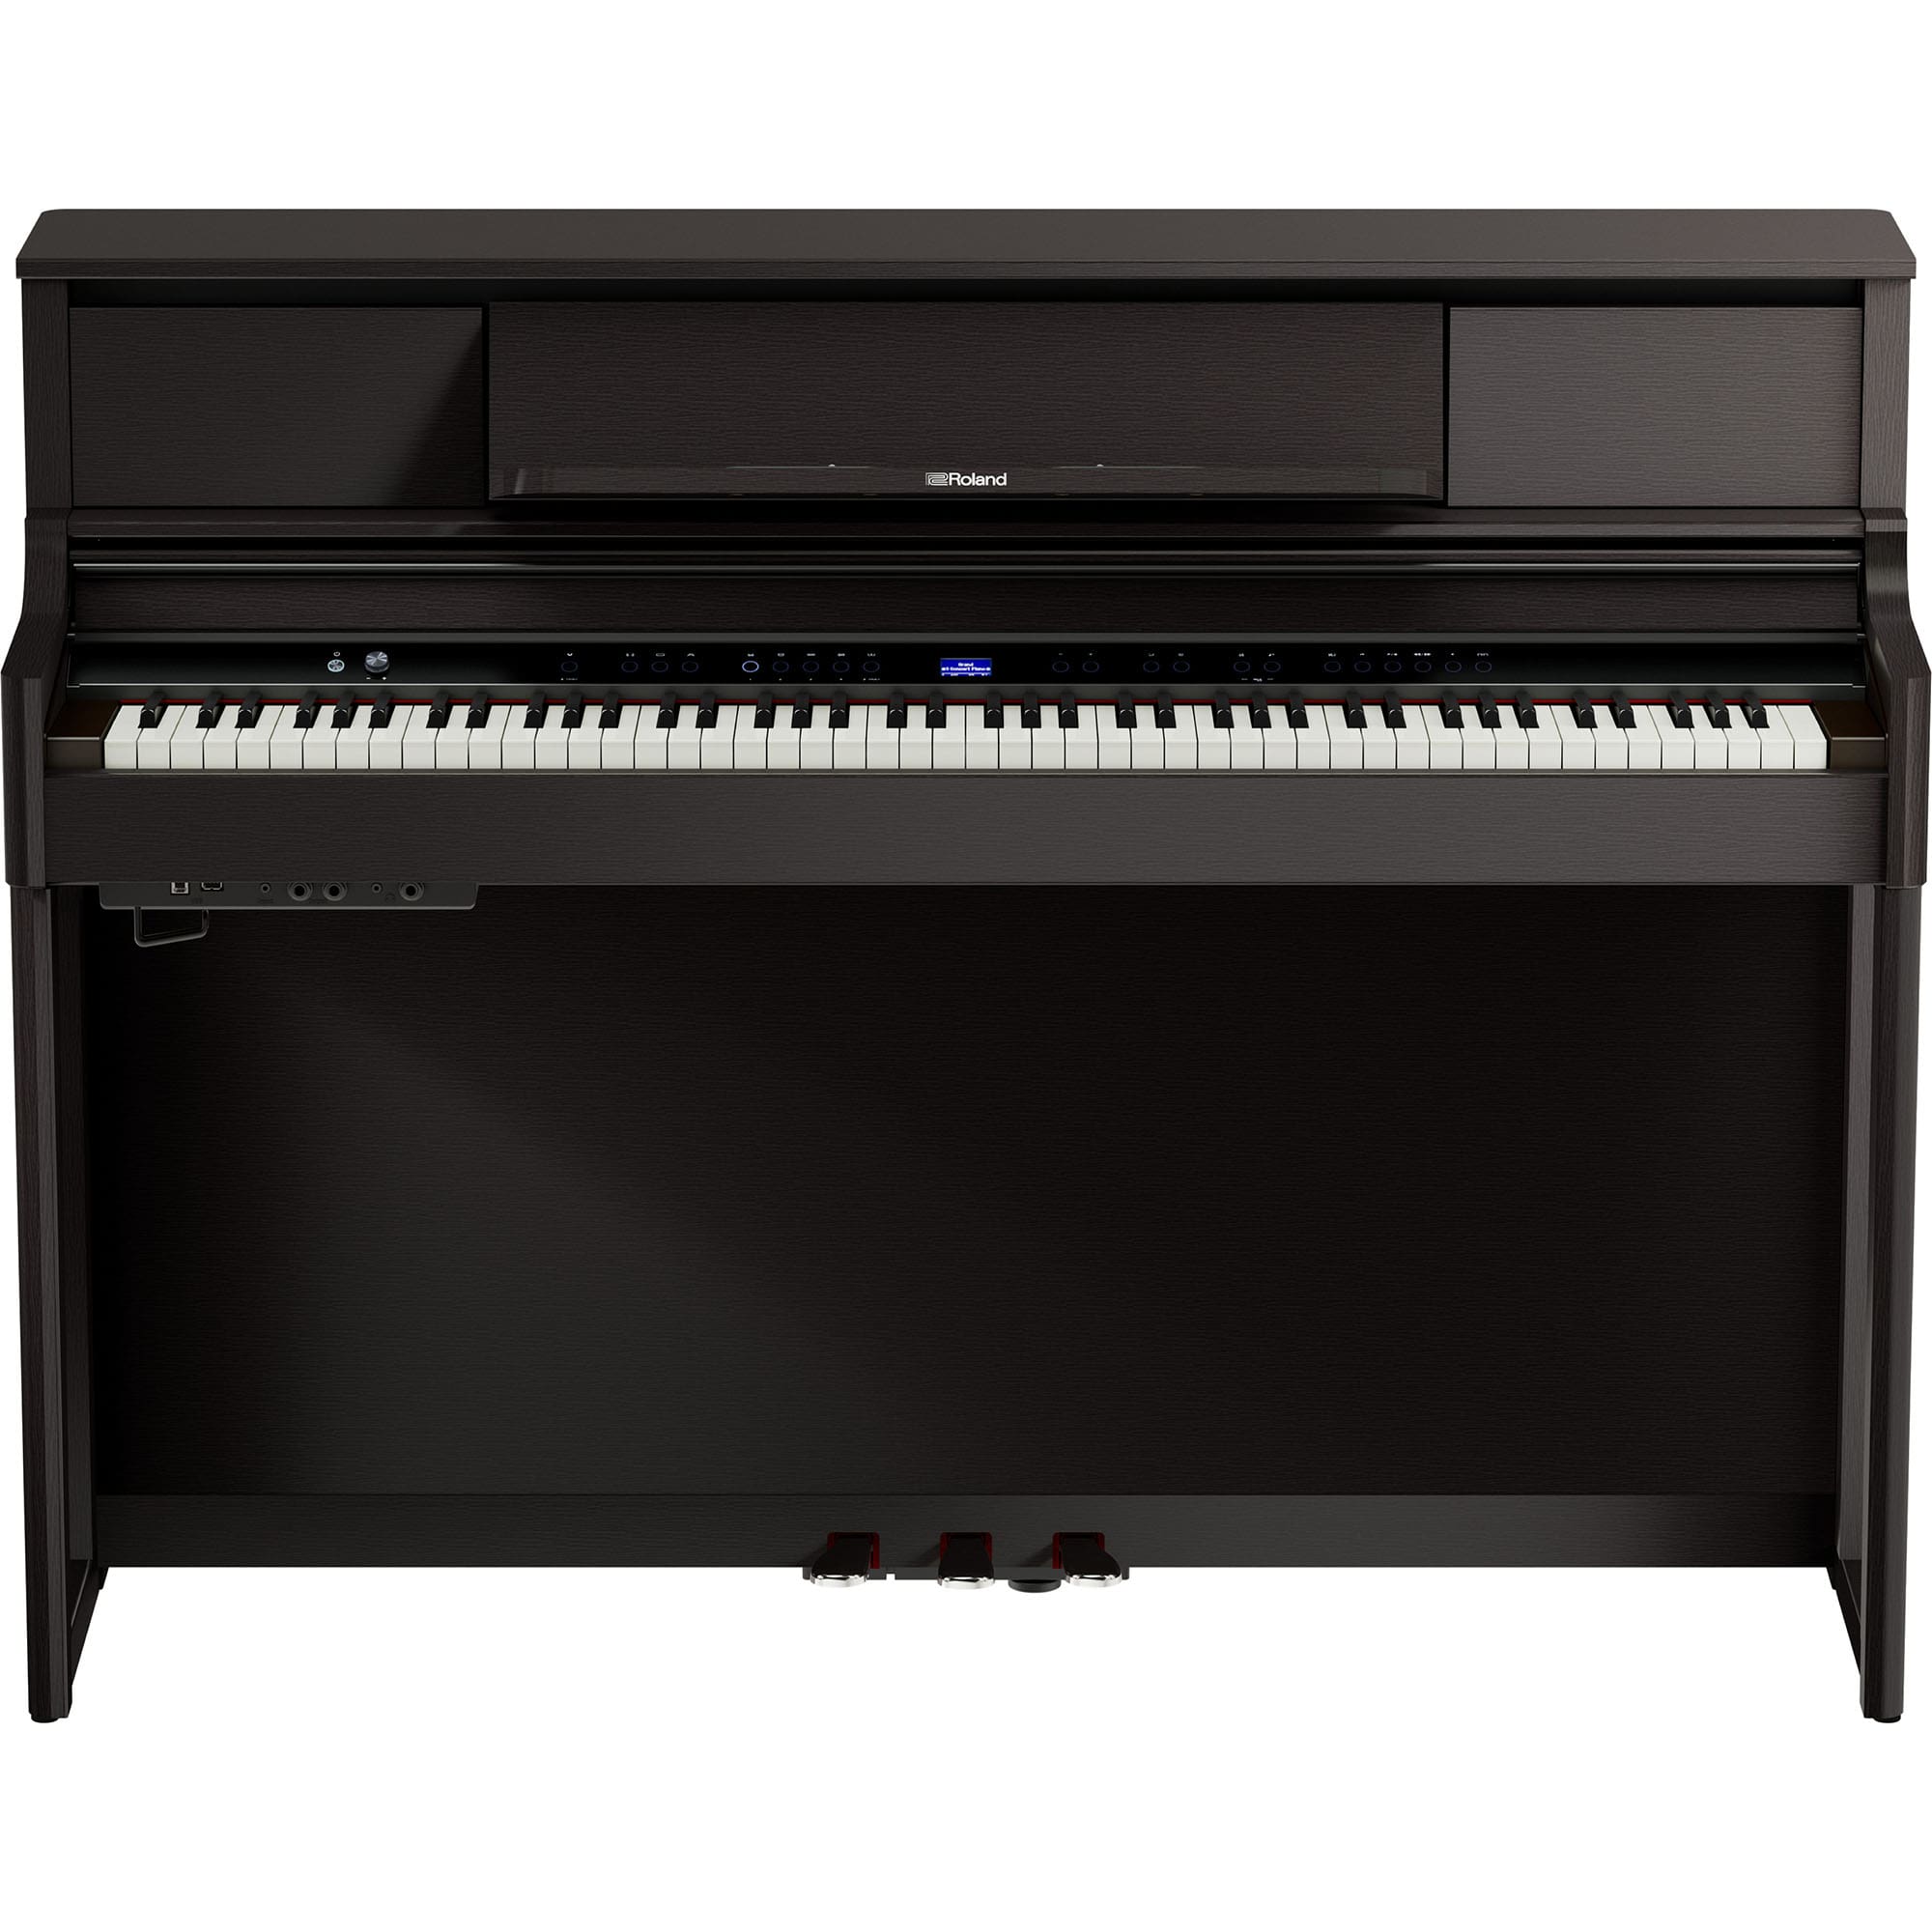 Roland Lx-5-dr - Dark Rosewood - Digital piano with stand - Variation 1